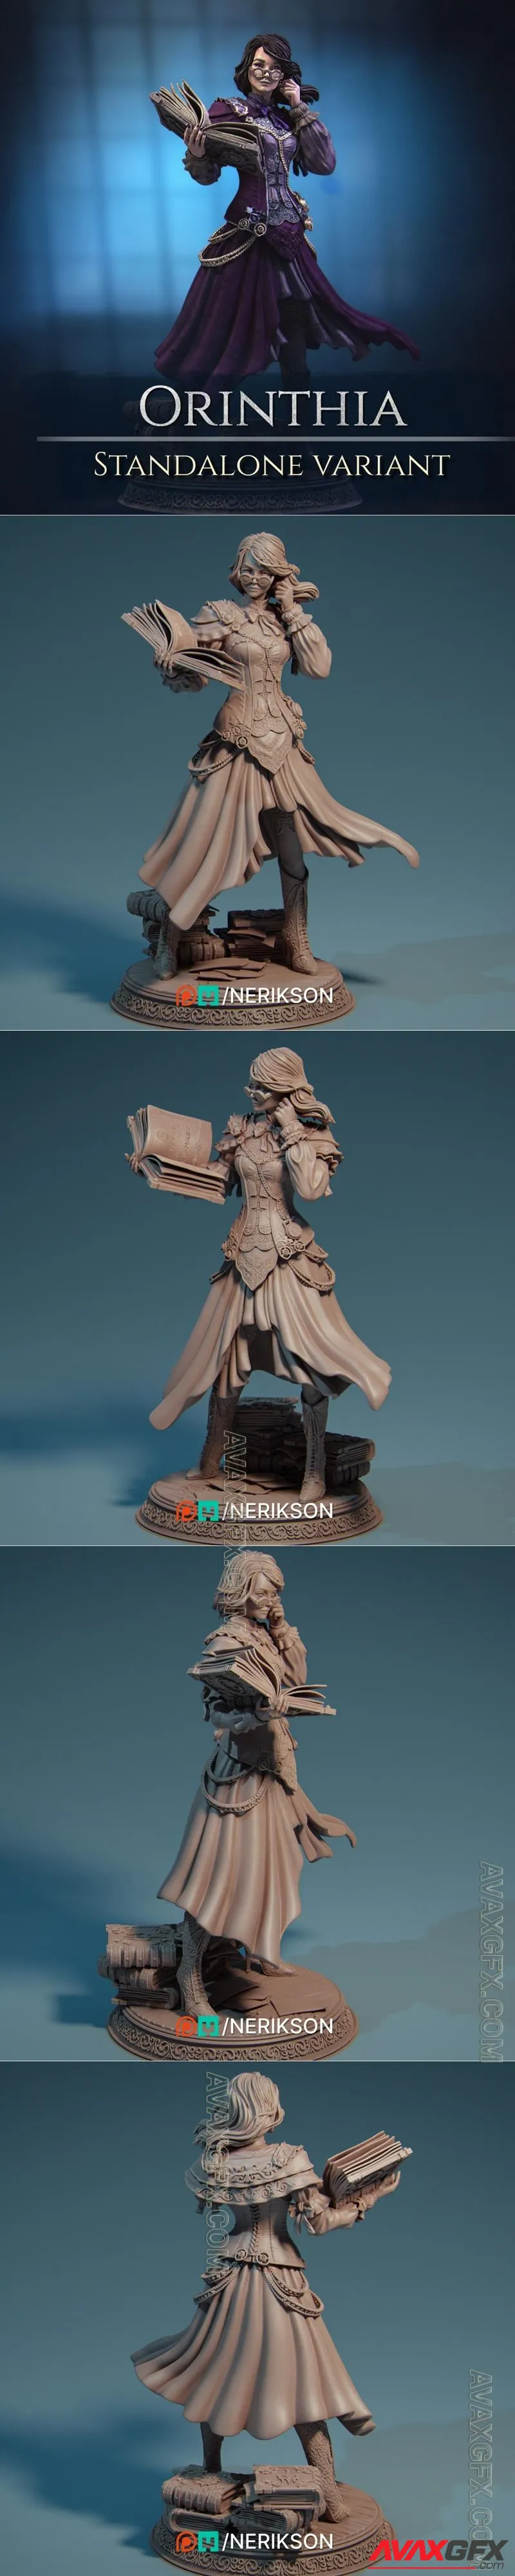 Nerikson - Orinthia The Magical Librarian STANDALONE - STL 3D Model